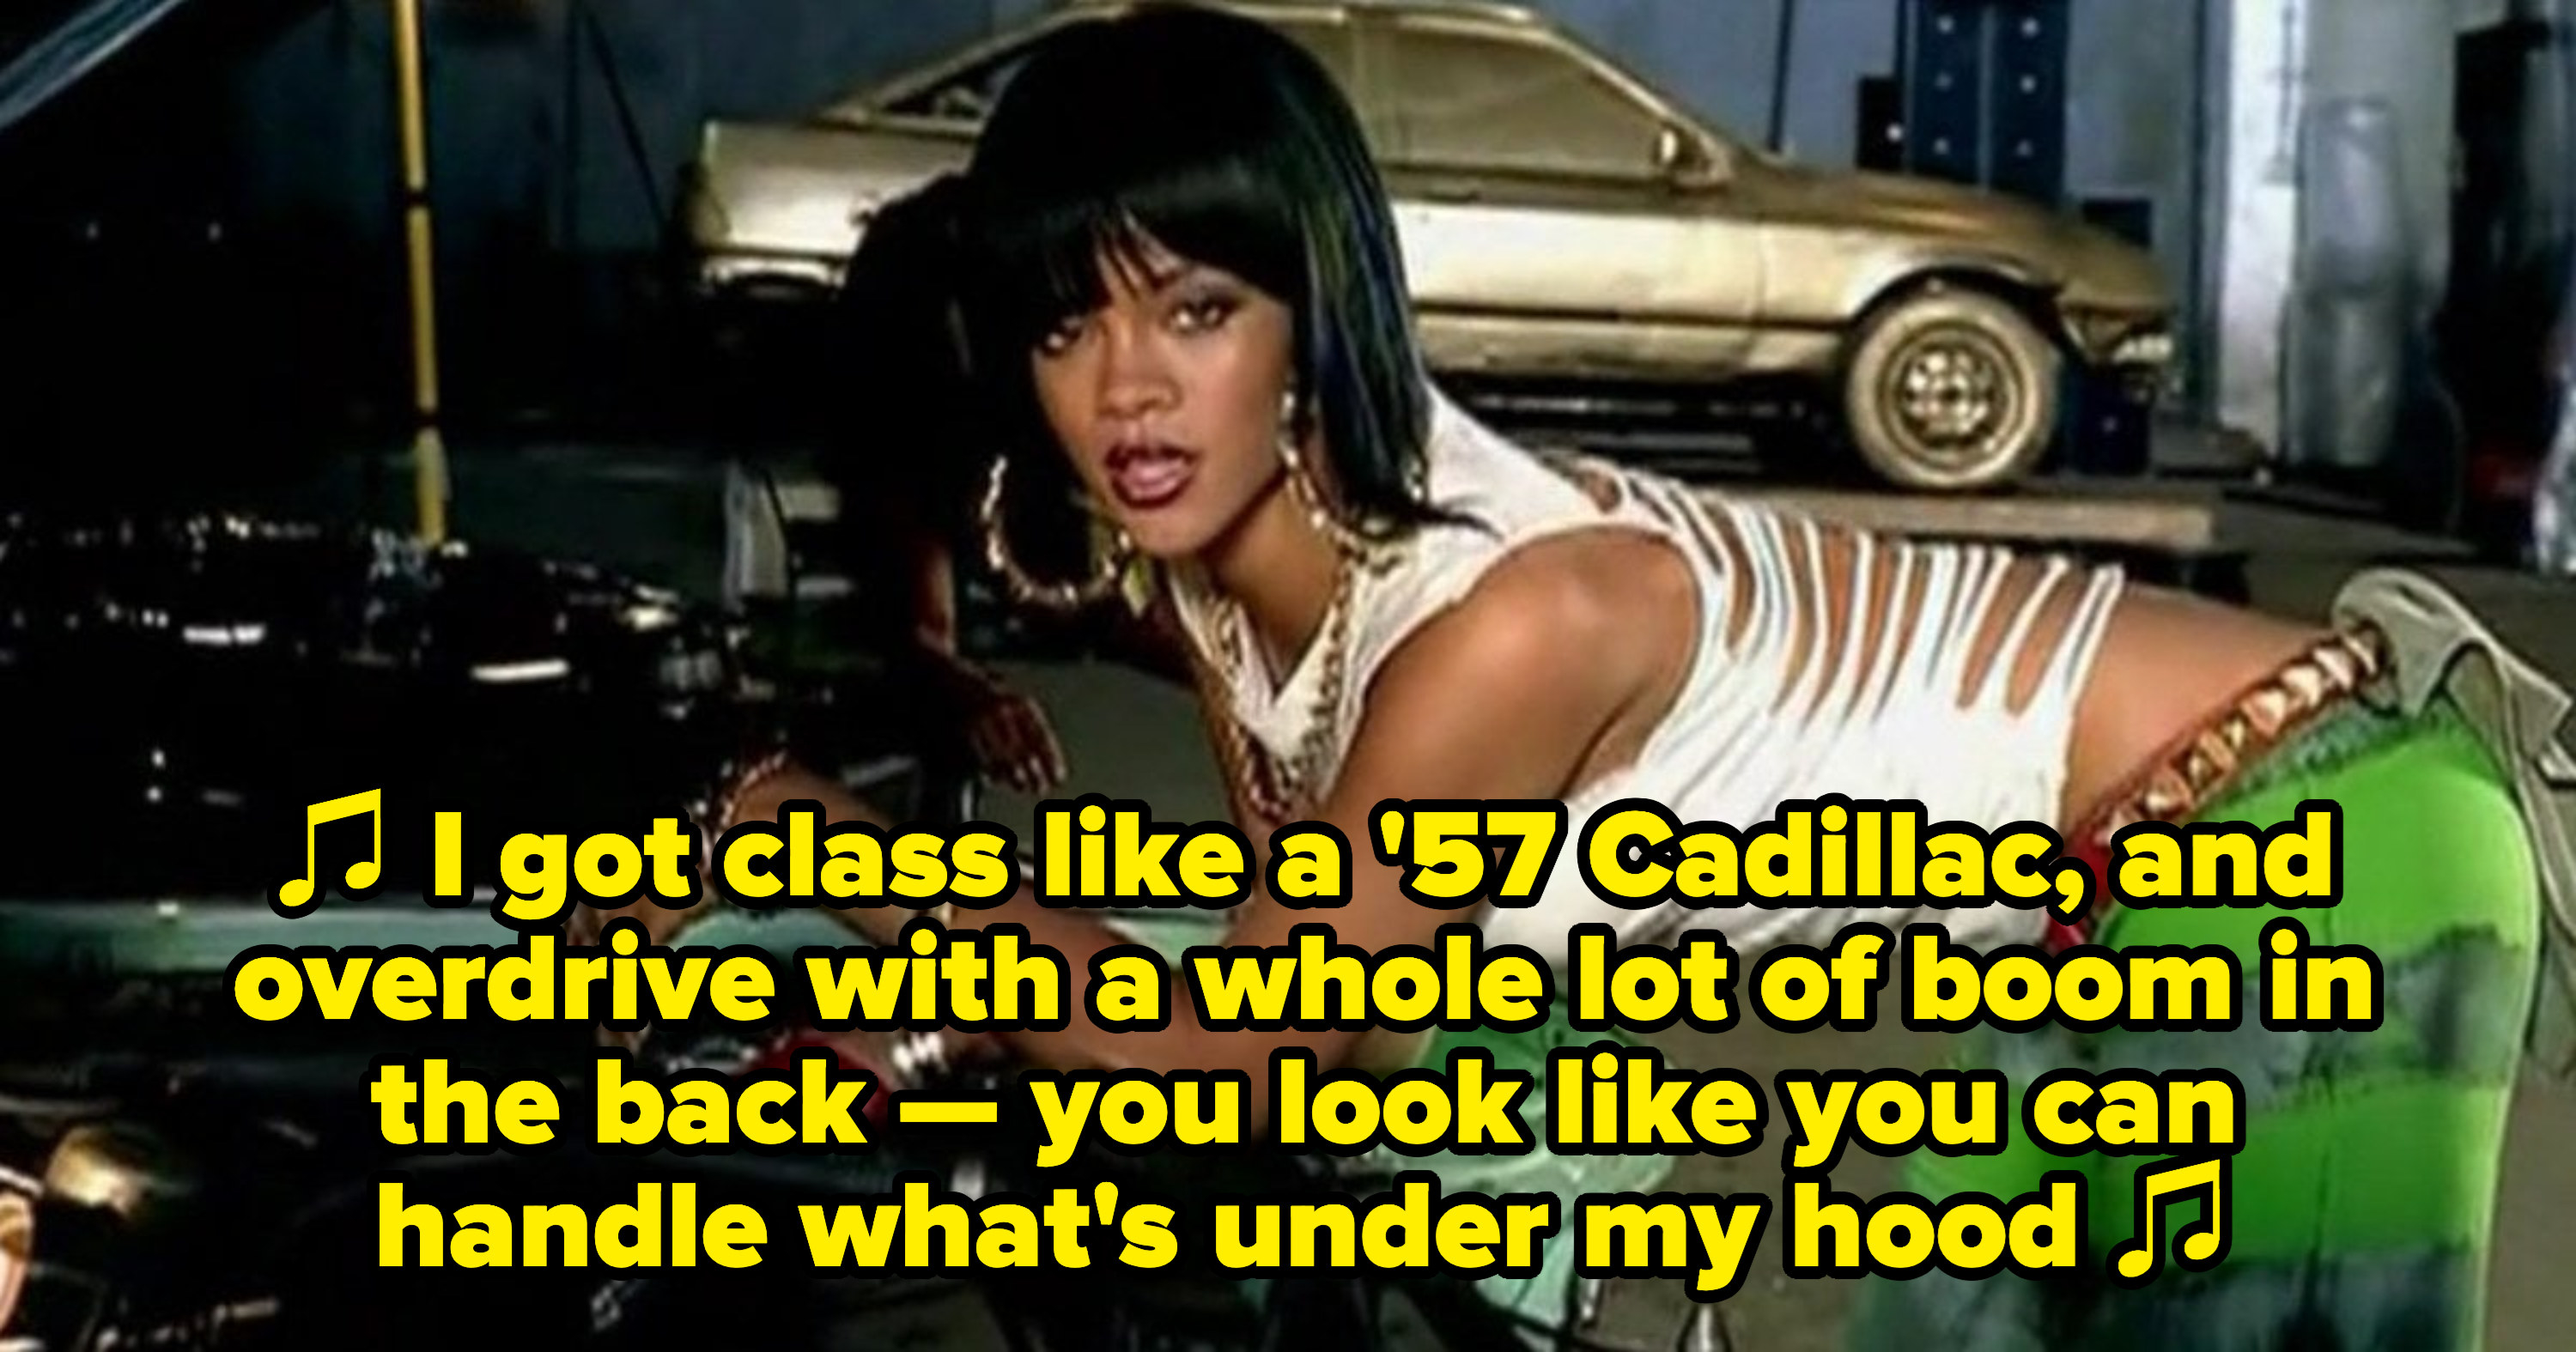 Rihanna singing: &quot;I got class like a &#x27;57 Cadillac, and overdrive with a whole lot of boom in the back — you look like you can handle what&#x27;s under my hood&quot;